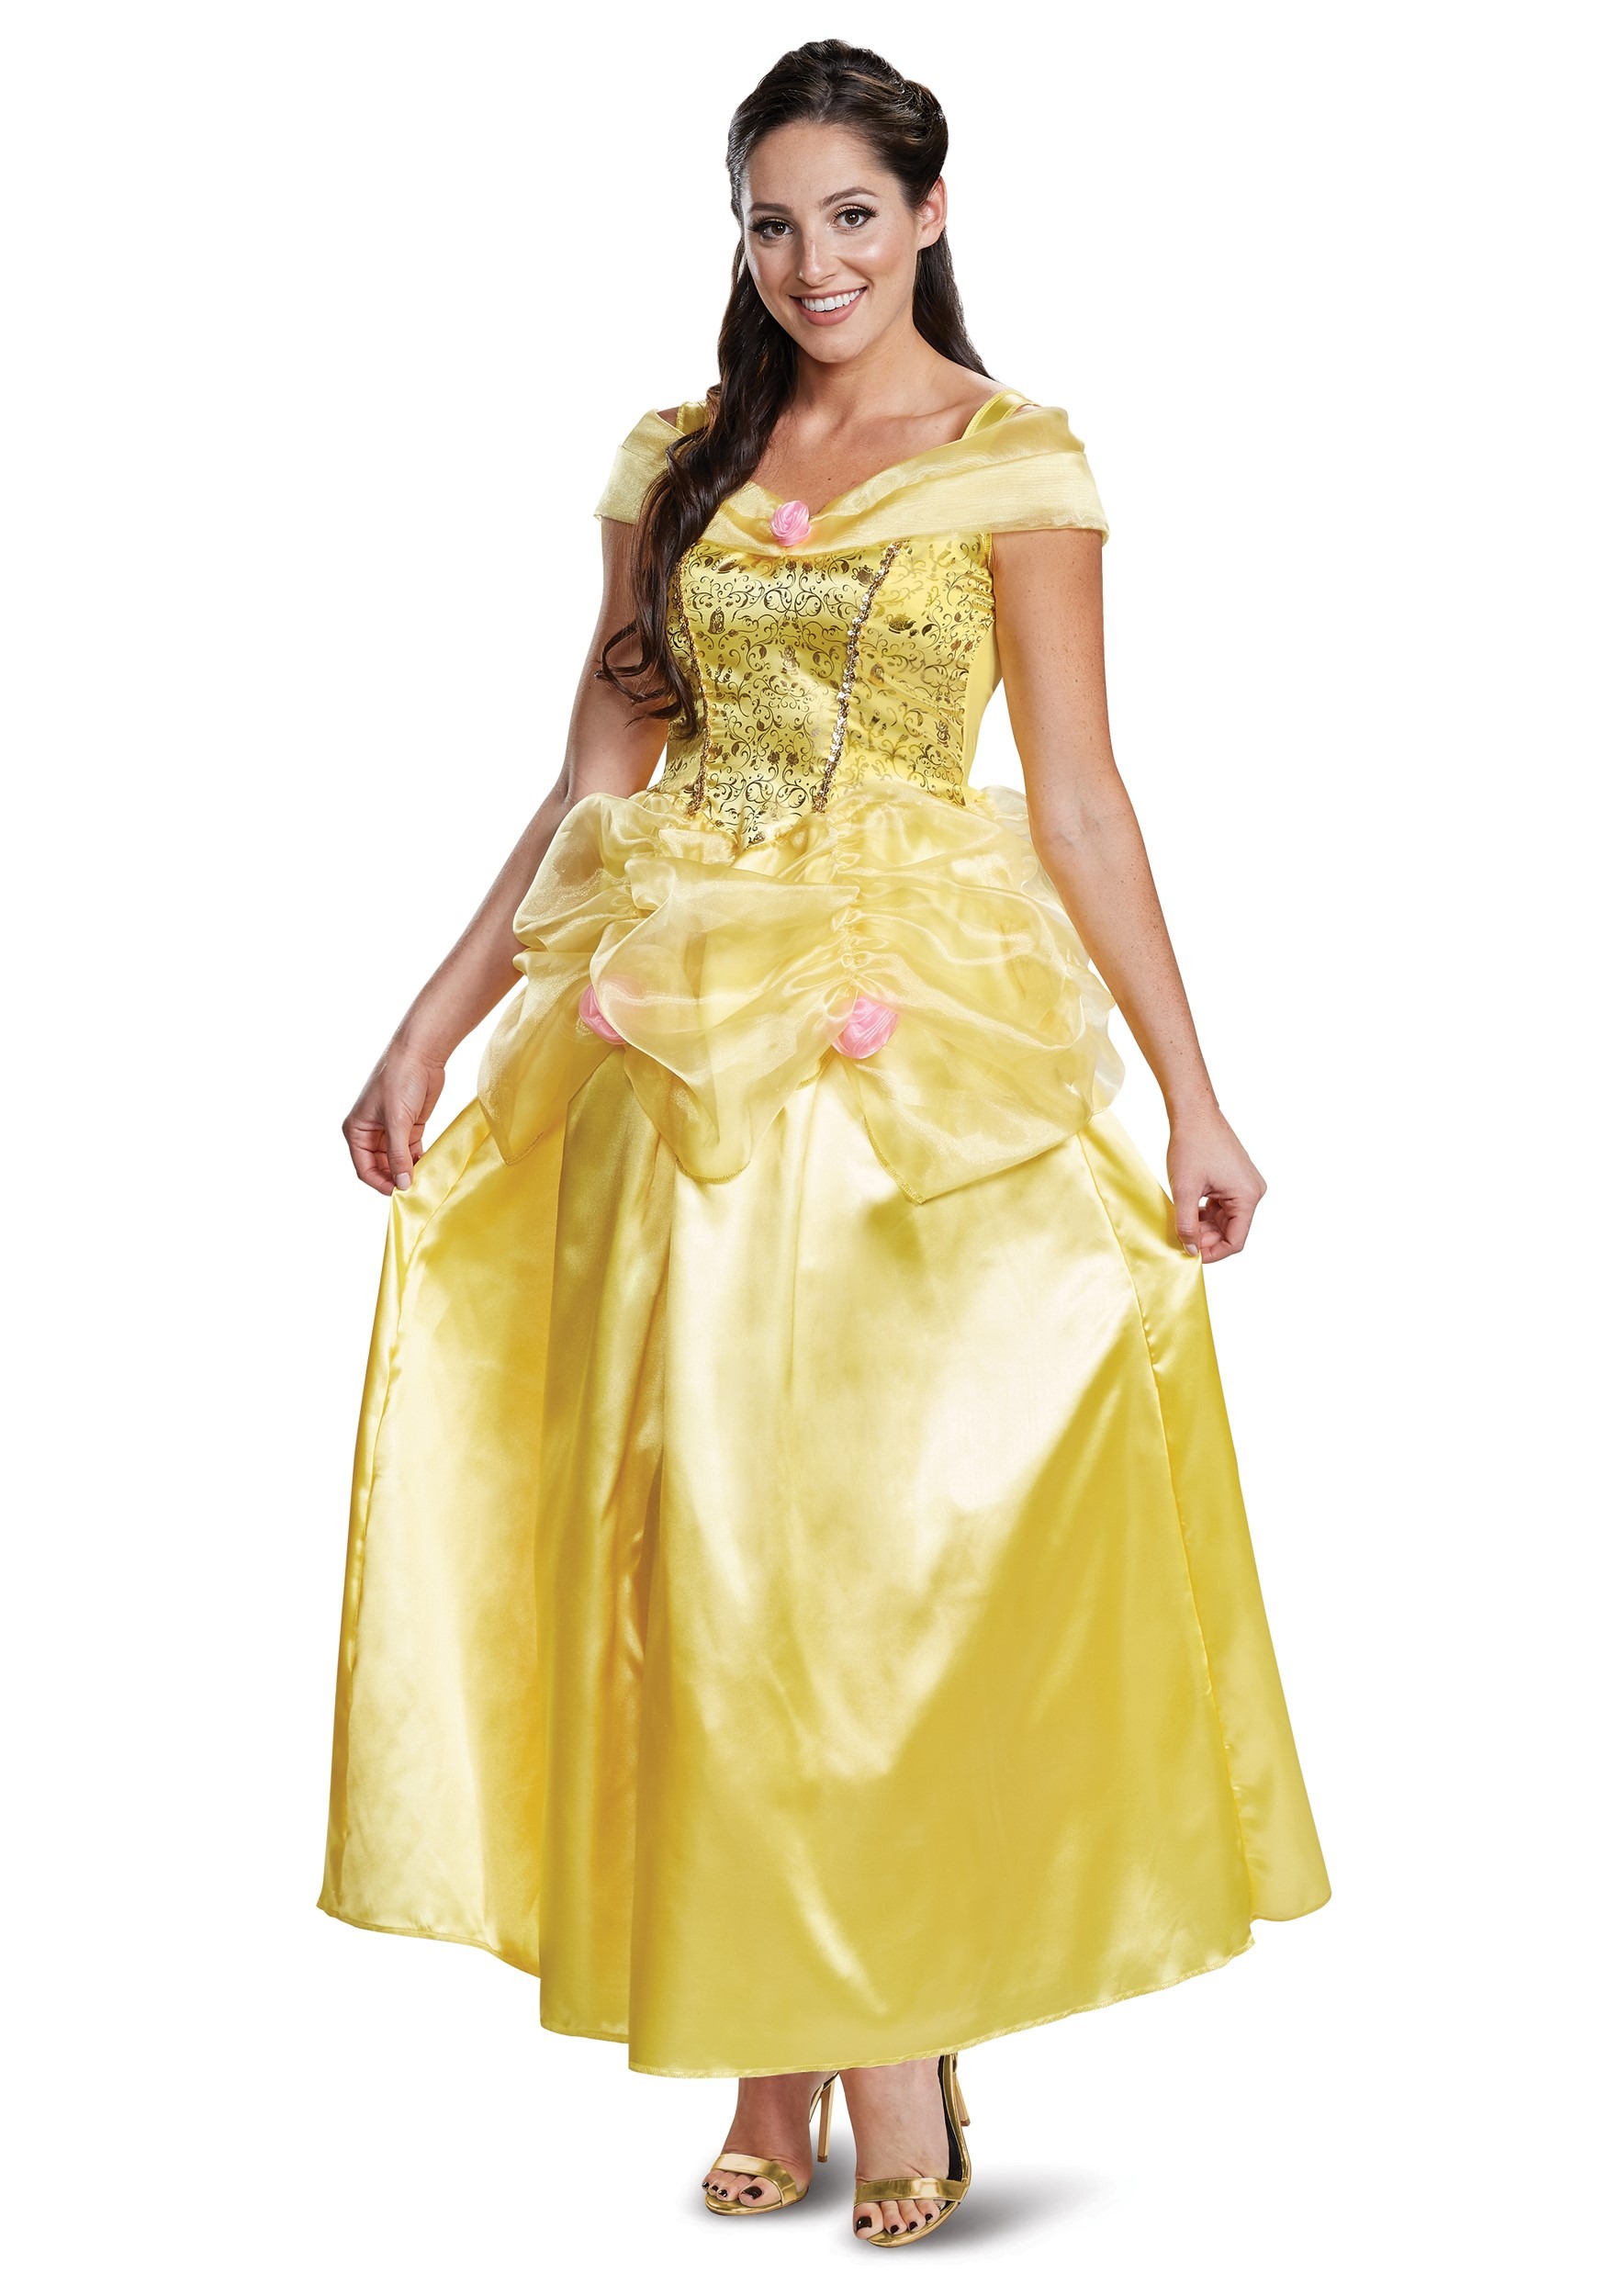 Image of Disney Belle Dress | The Beast Deluxe Classic Belle Costume ID DI67282-L